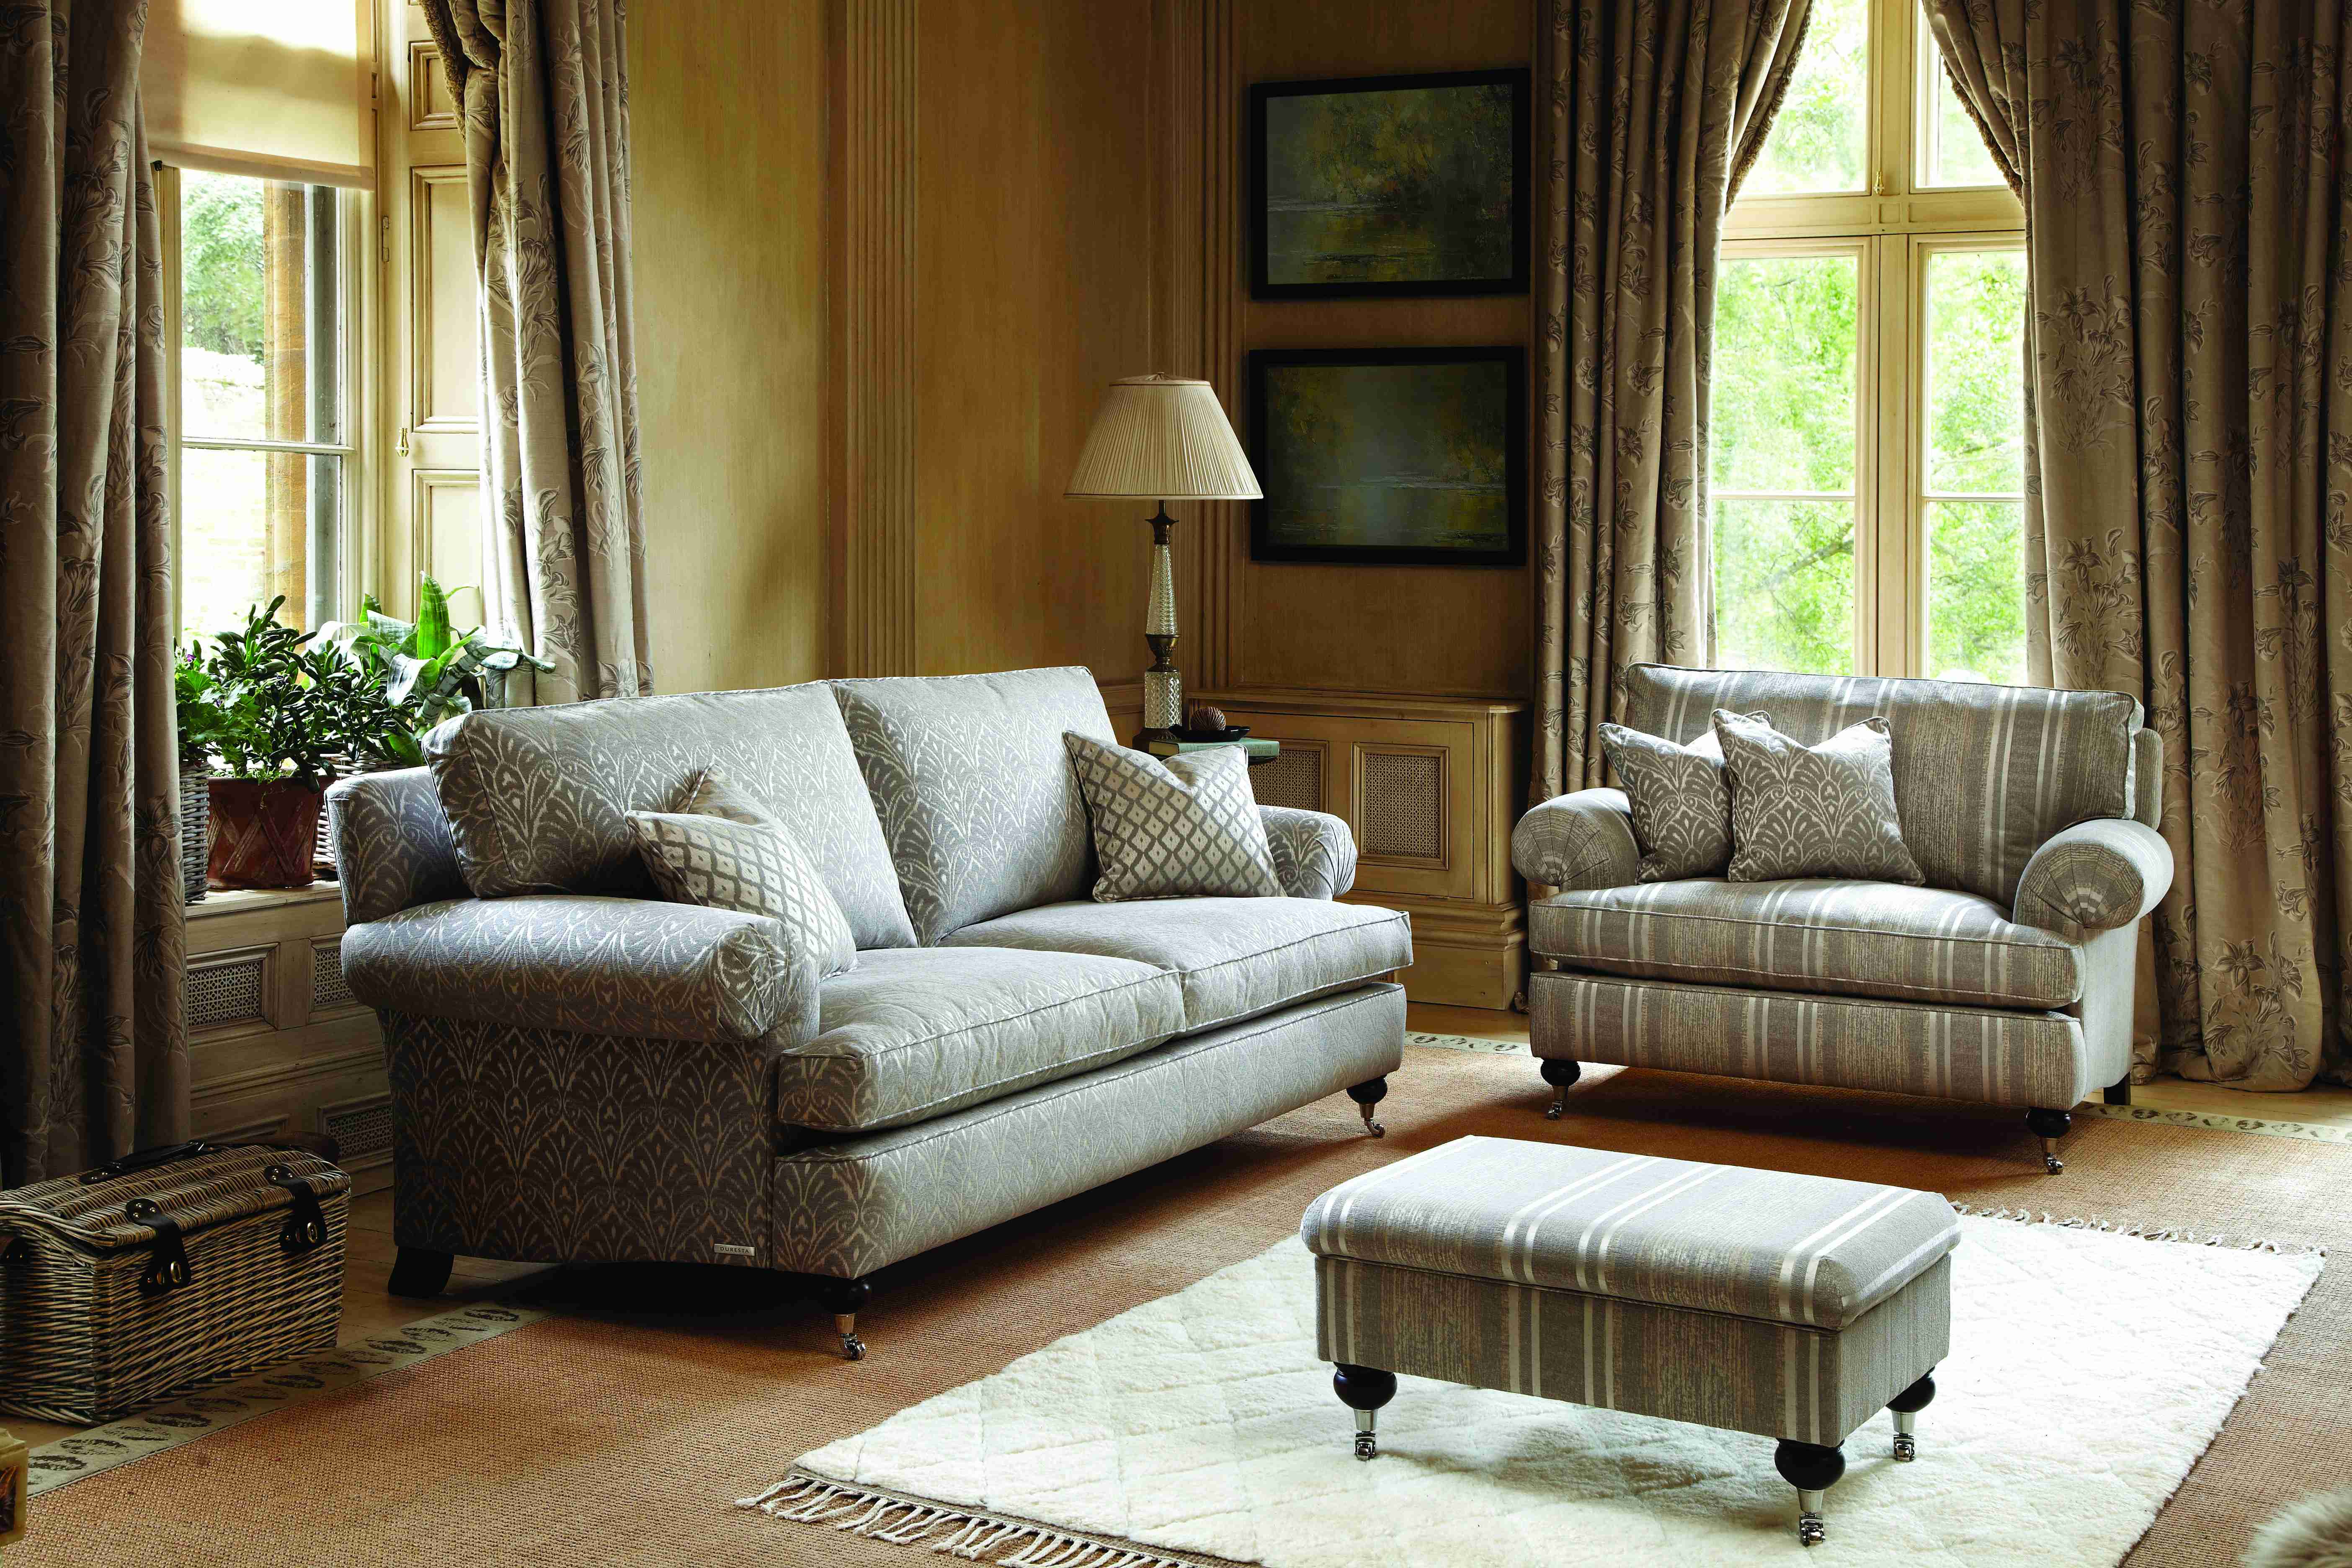 Upholstery & Drapery Services